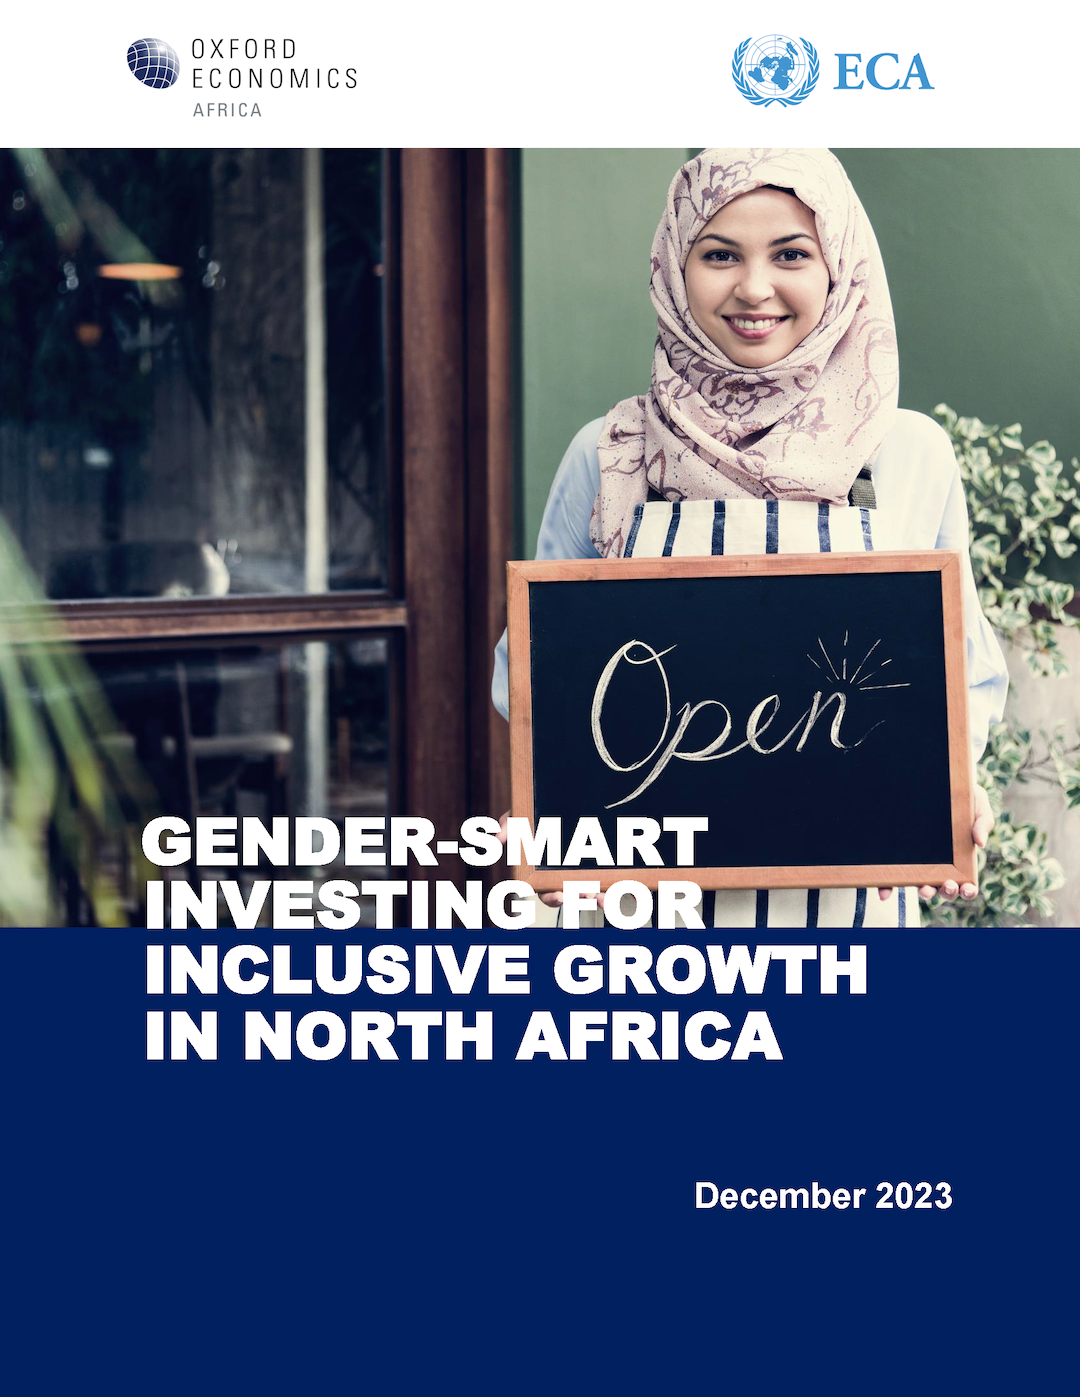 Gender-Smart Investing for Inclusive Growth in North Africa